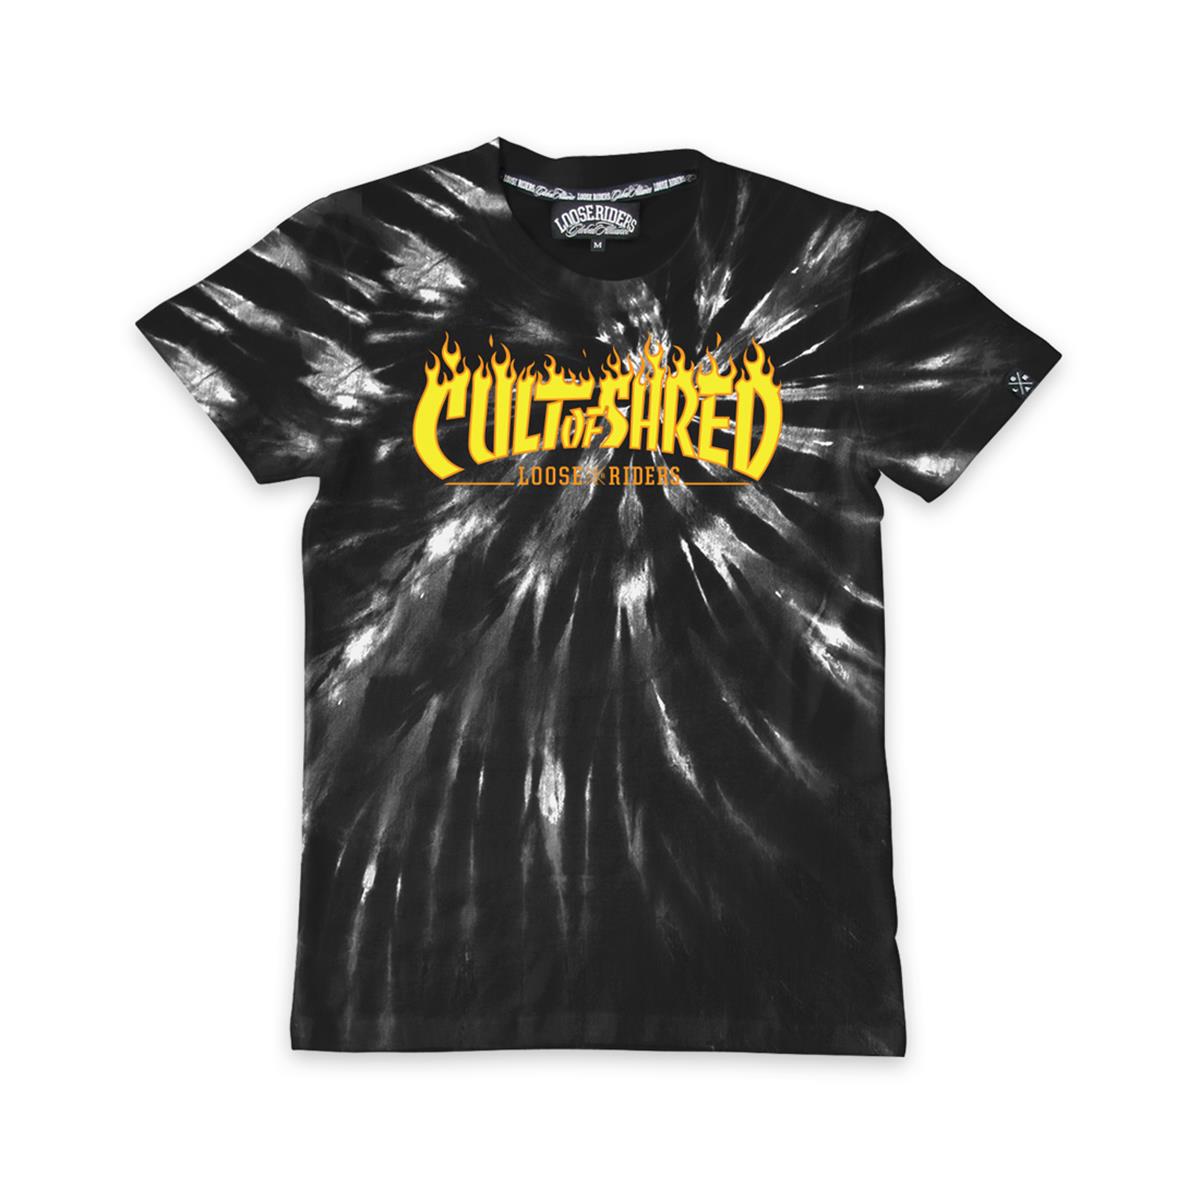 Loose Riders T-Shirt Cult of Shred TD Black